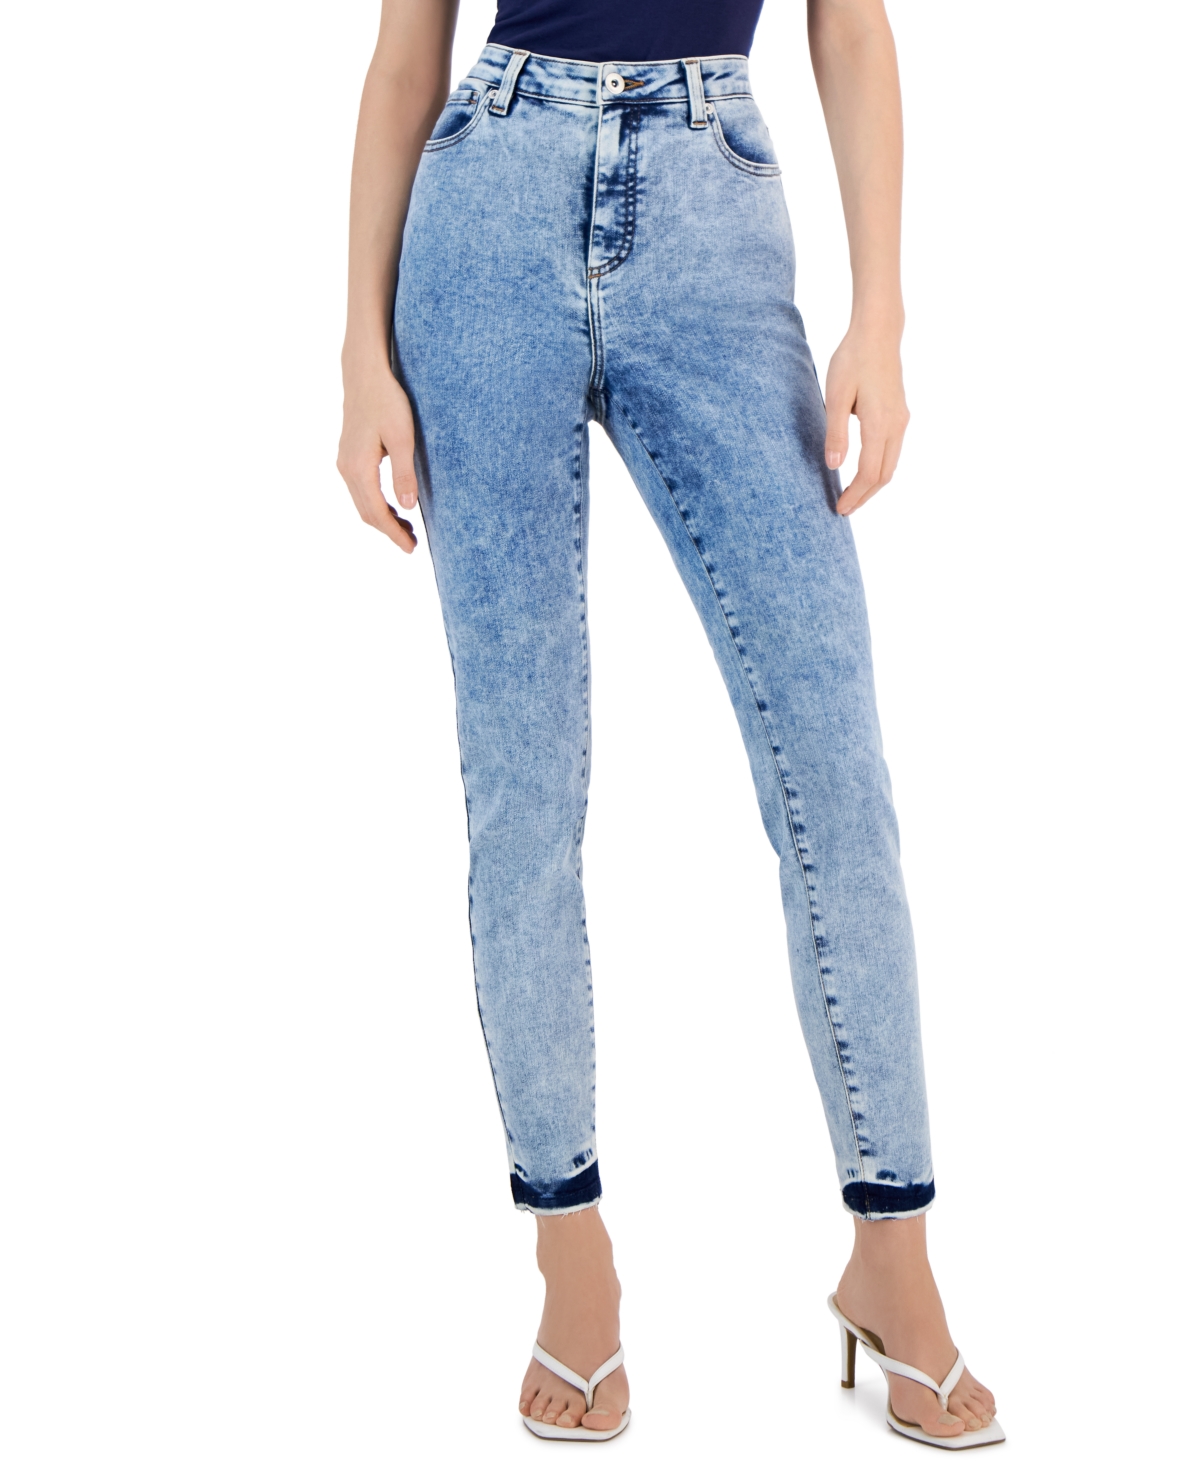  Inc International Concepts Women's High Rise Skinny Jeans, Created for Macy's